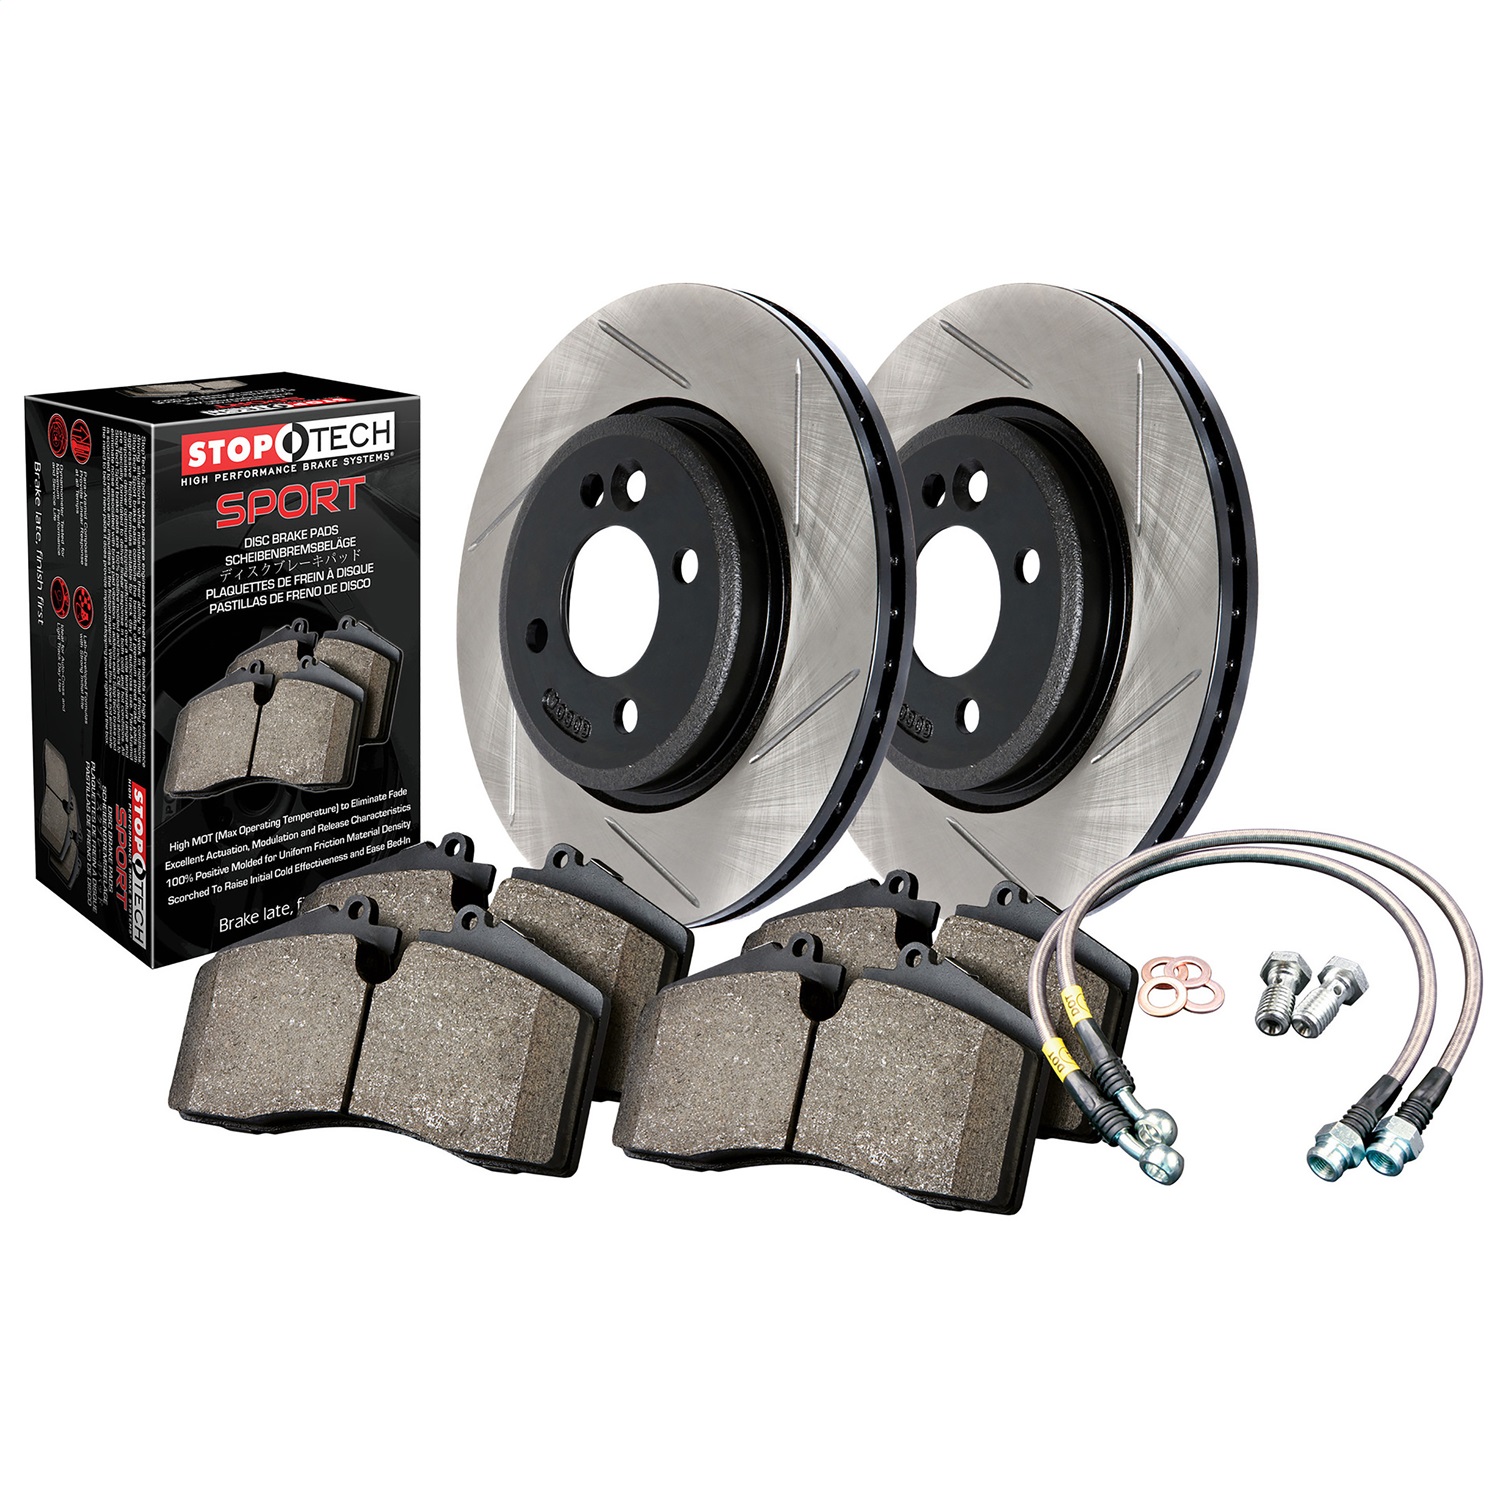 StopTech 977.34078R Sport Disc Brake Kit w/Slotted Rotors